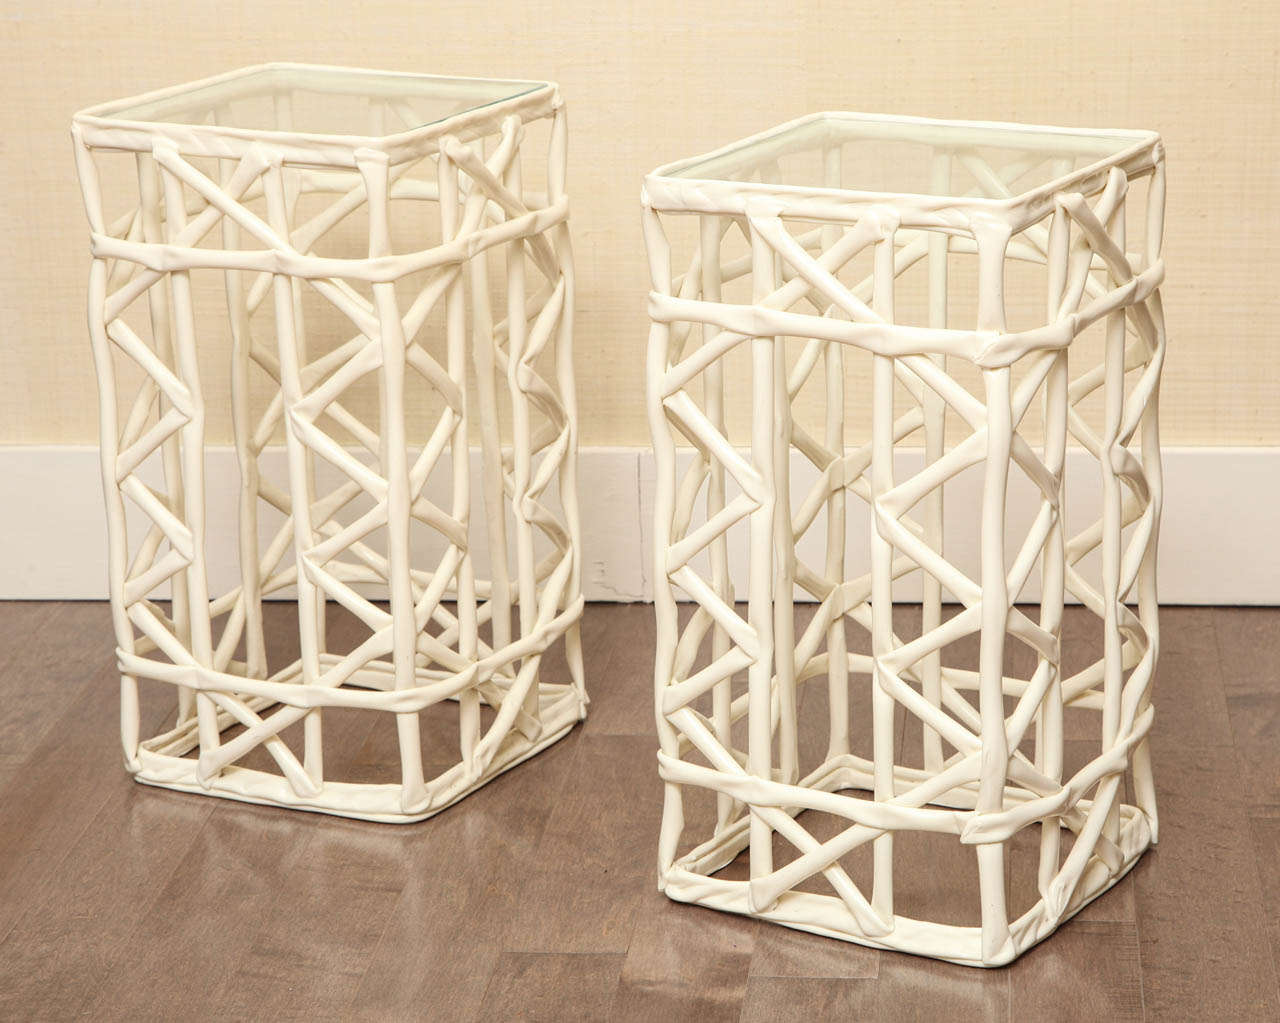 Pair of lattice resin prototype drinks tables with glass tops  c. 1960